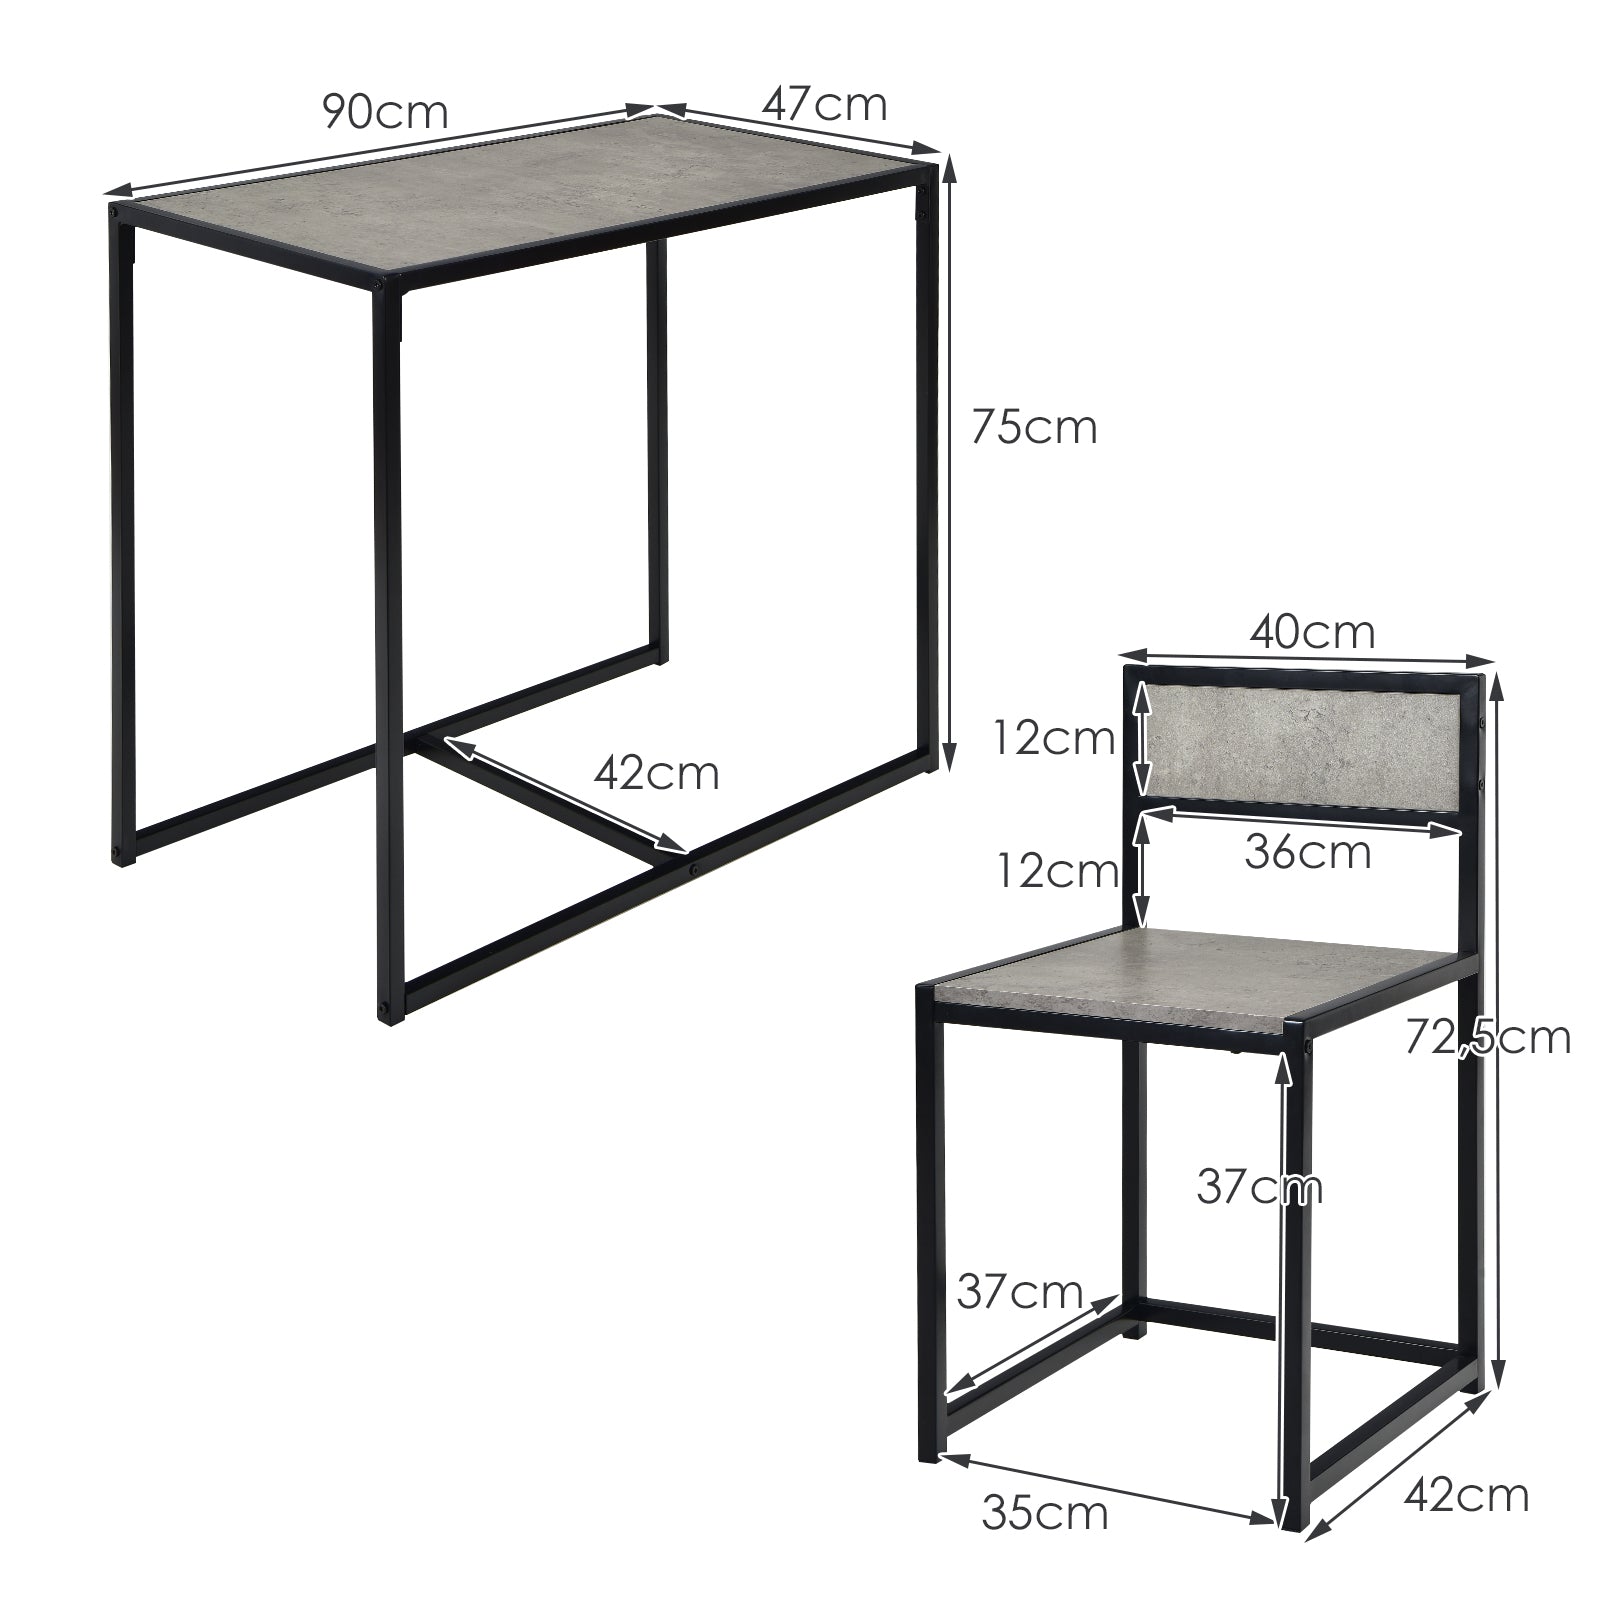 Compact Table and Chair Set-Gray